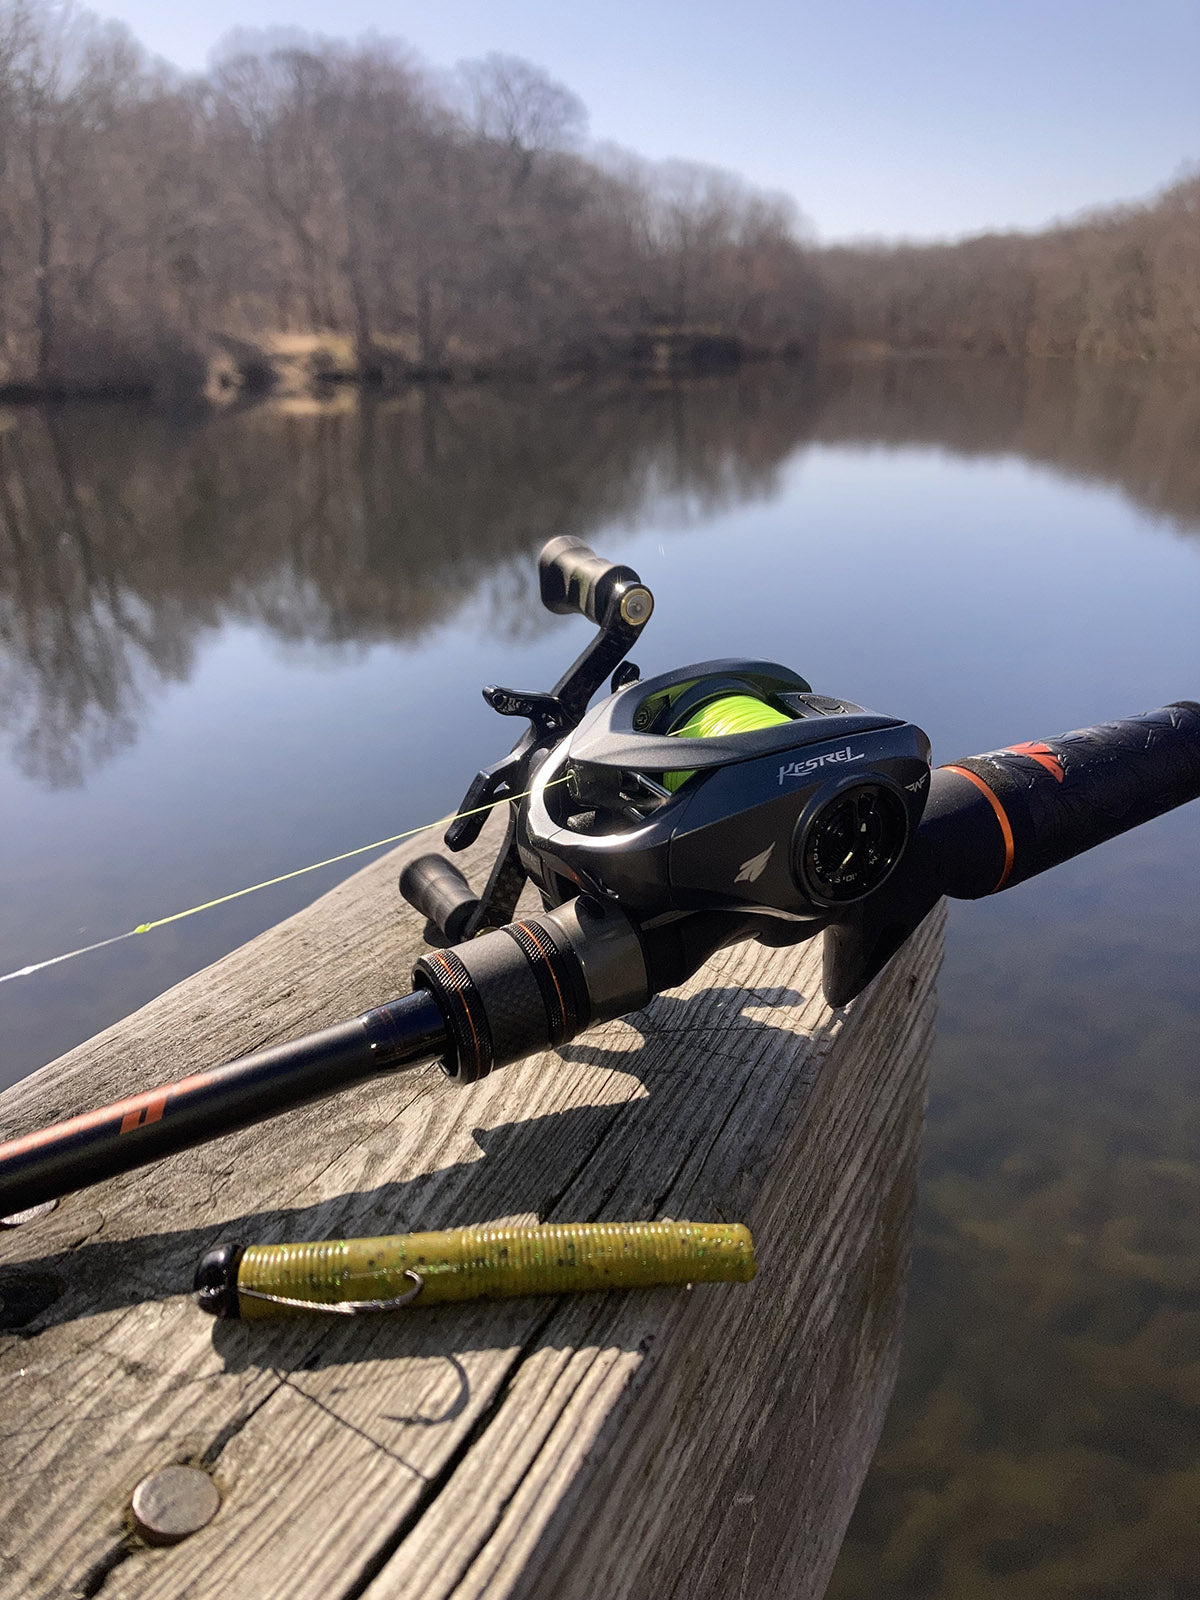 Buyer's Guide: BFS (Bait Finesse System) Rod and Reel Combos – KastKing